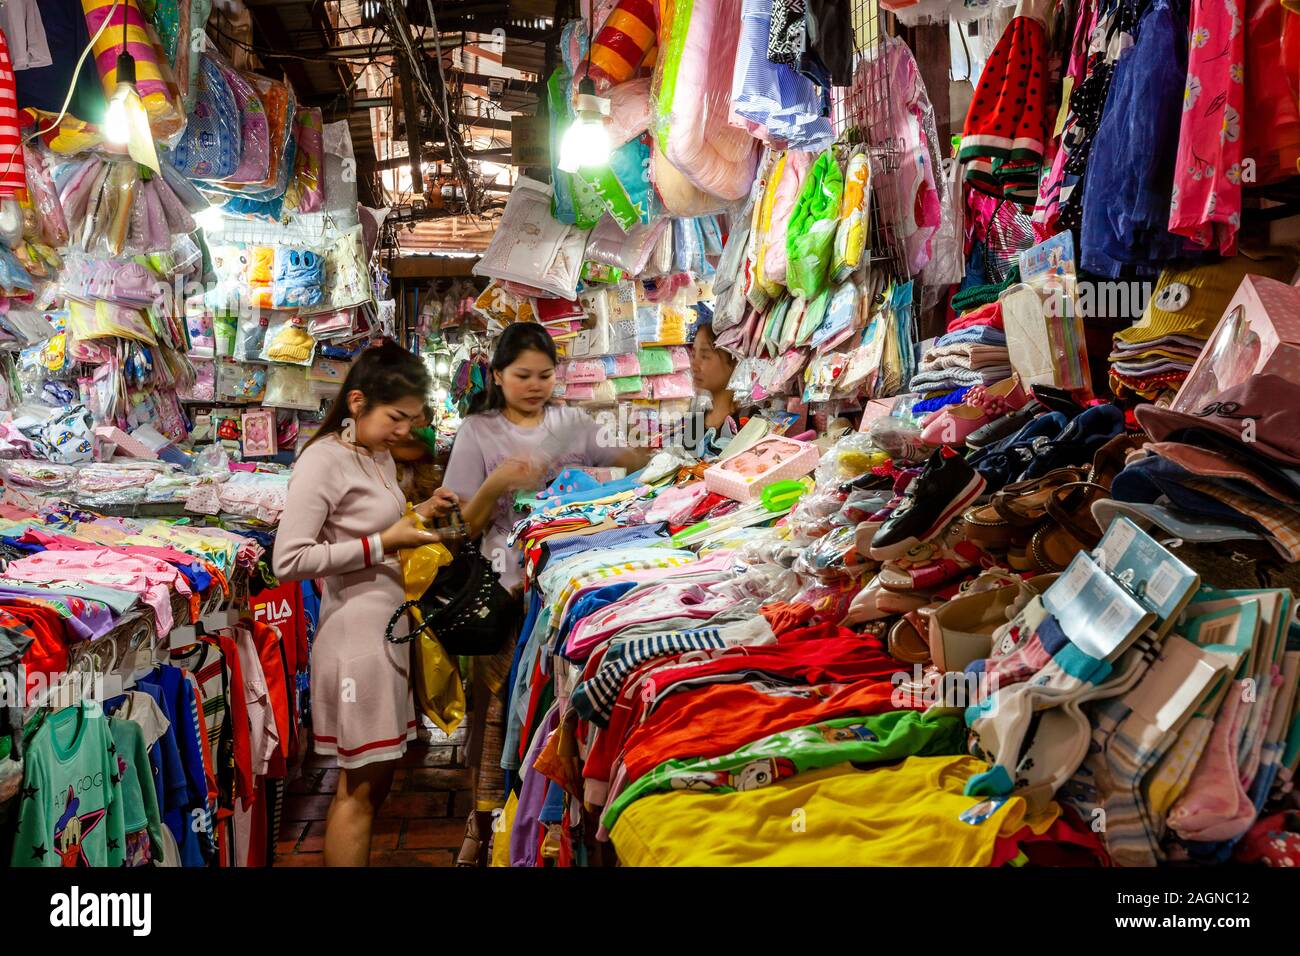 Young Women Shopping In The Russian Market, Phnom Penh, Cambodia. Stock Photo